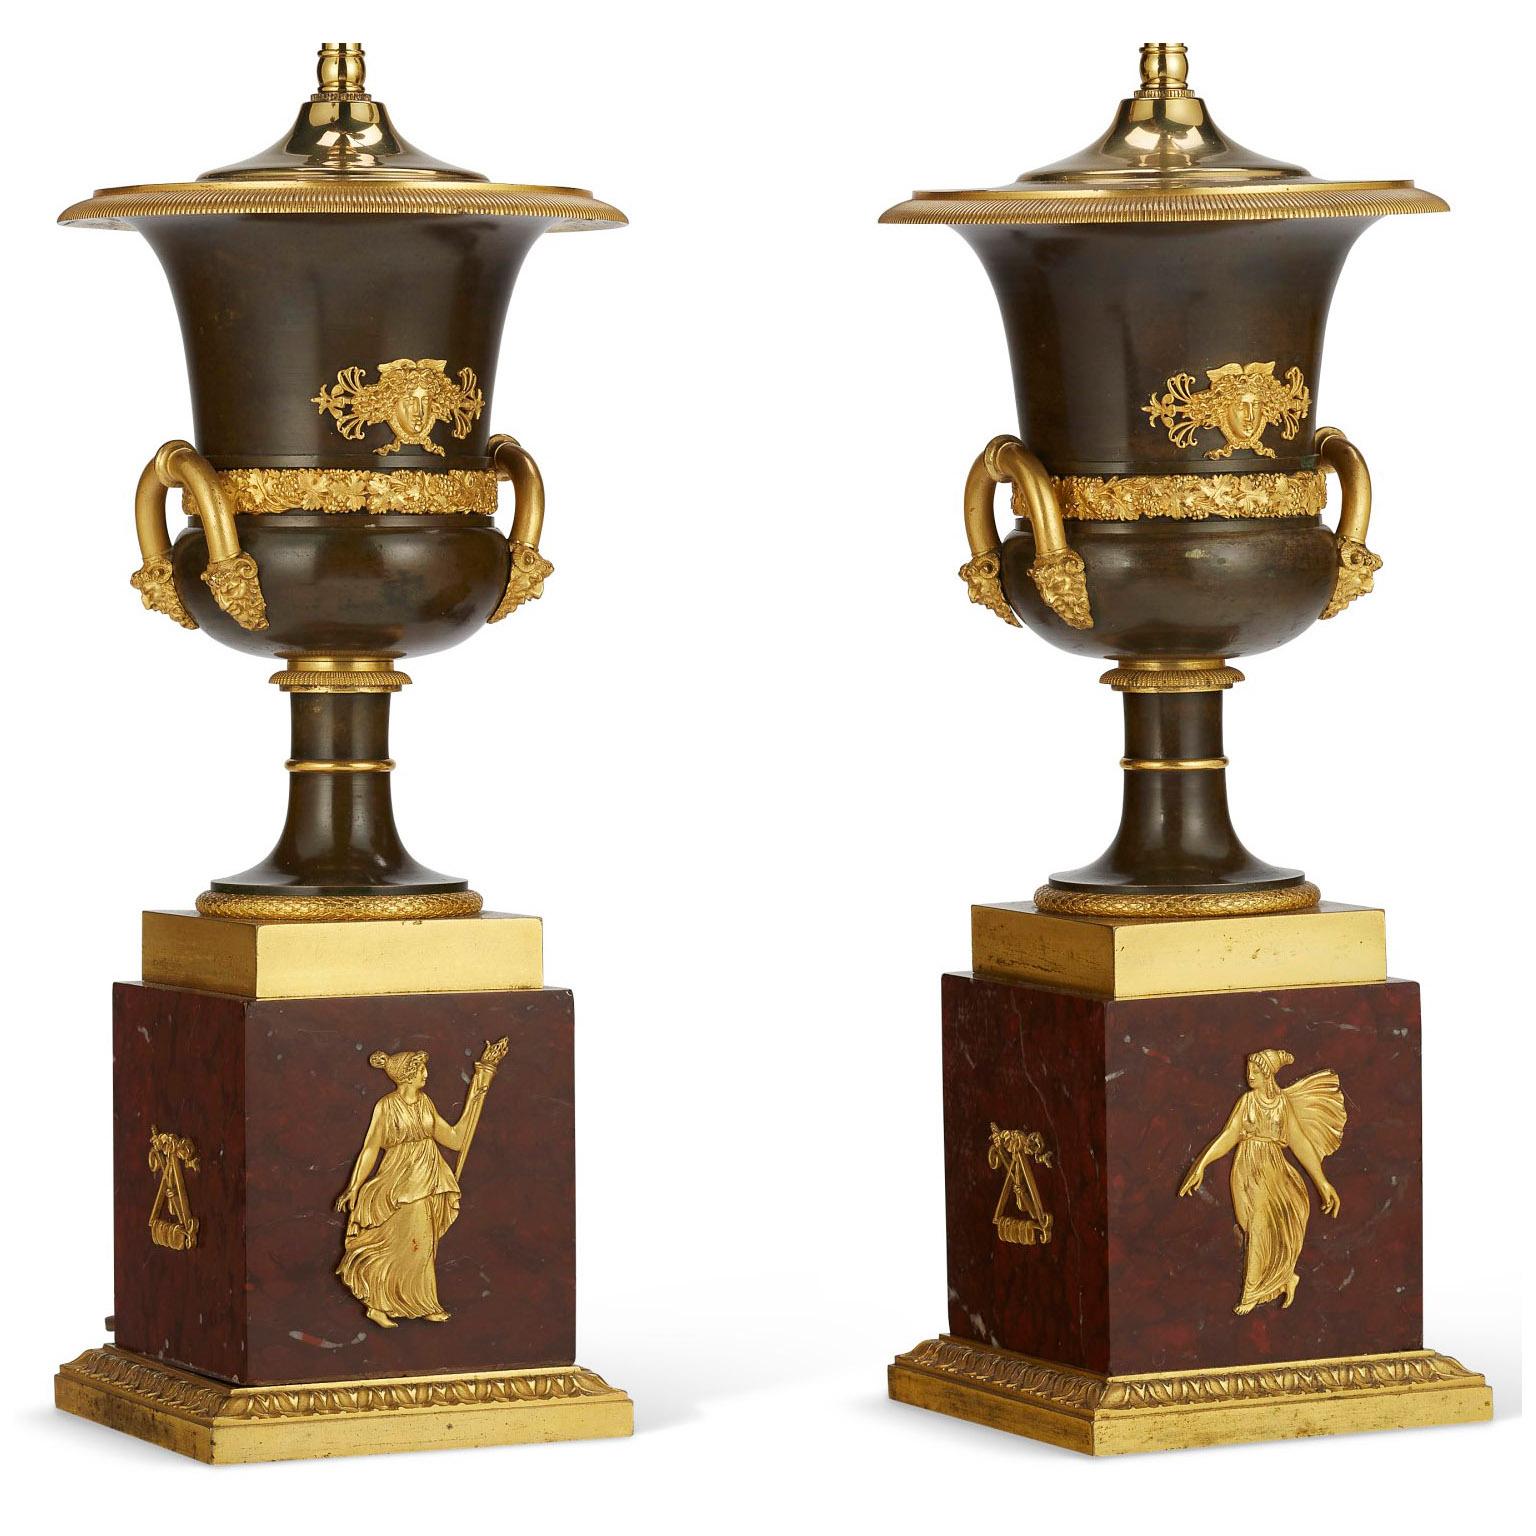 A very fine pair of French 19th century Napoleon III Empire style patinated-bronze and gilt-bronze Mounted Allegorical covered Urn vases lamps in the manner of Pierre-Philippe Thomire (French, 1751–1843). The ovoid campana-shaped patinated brass